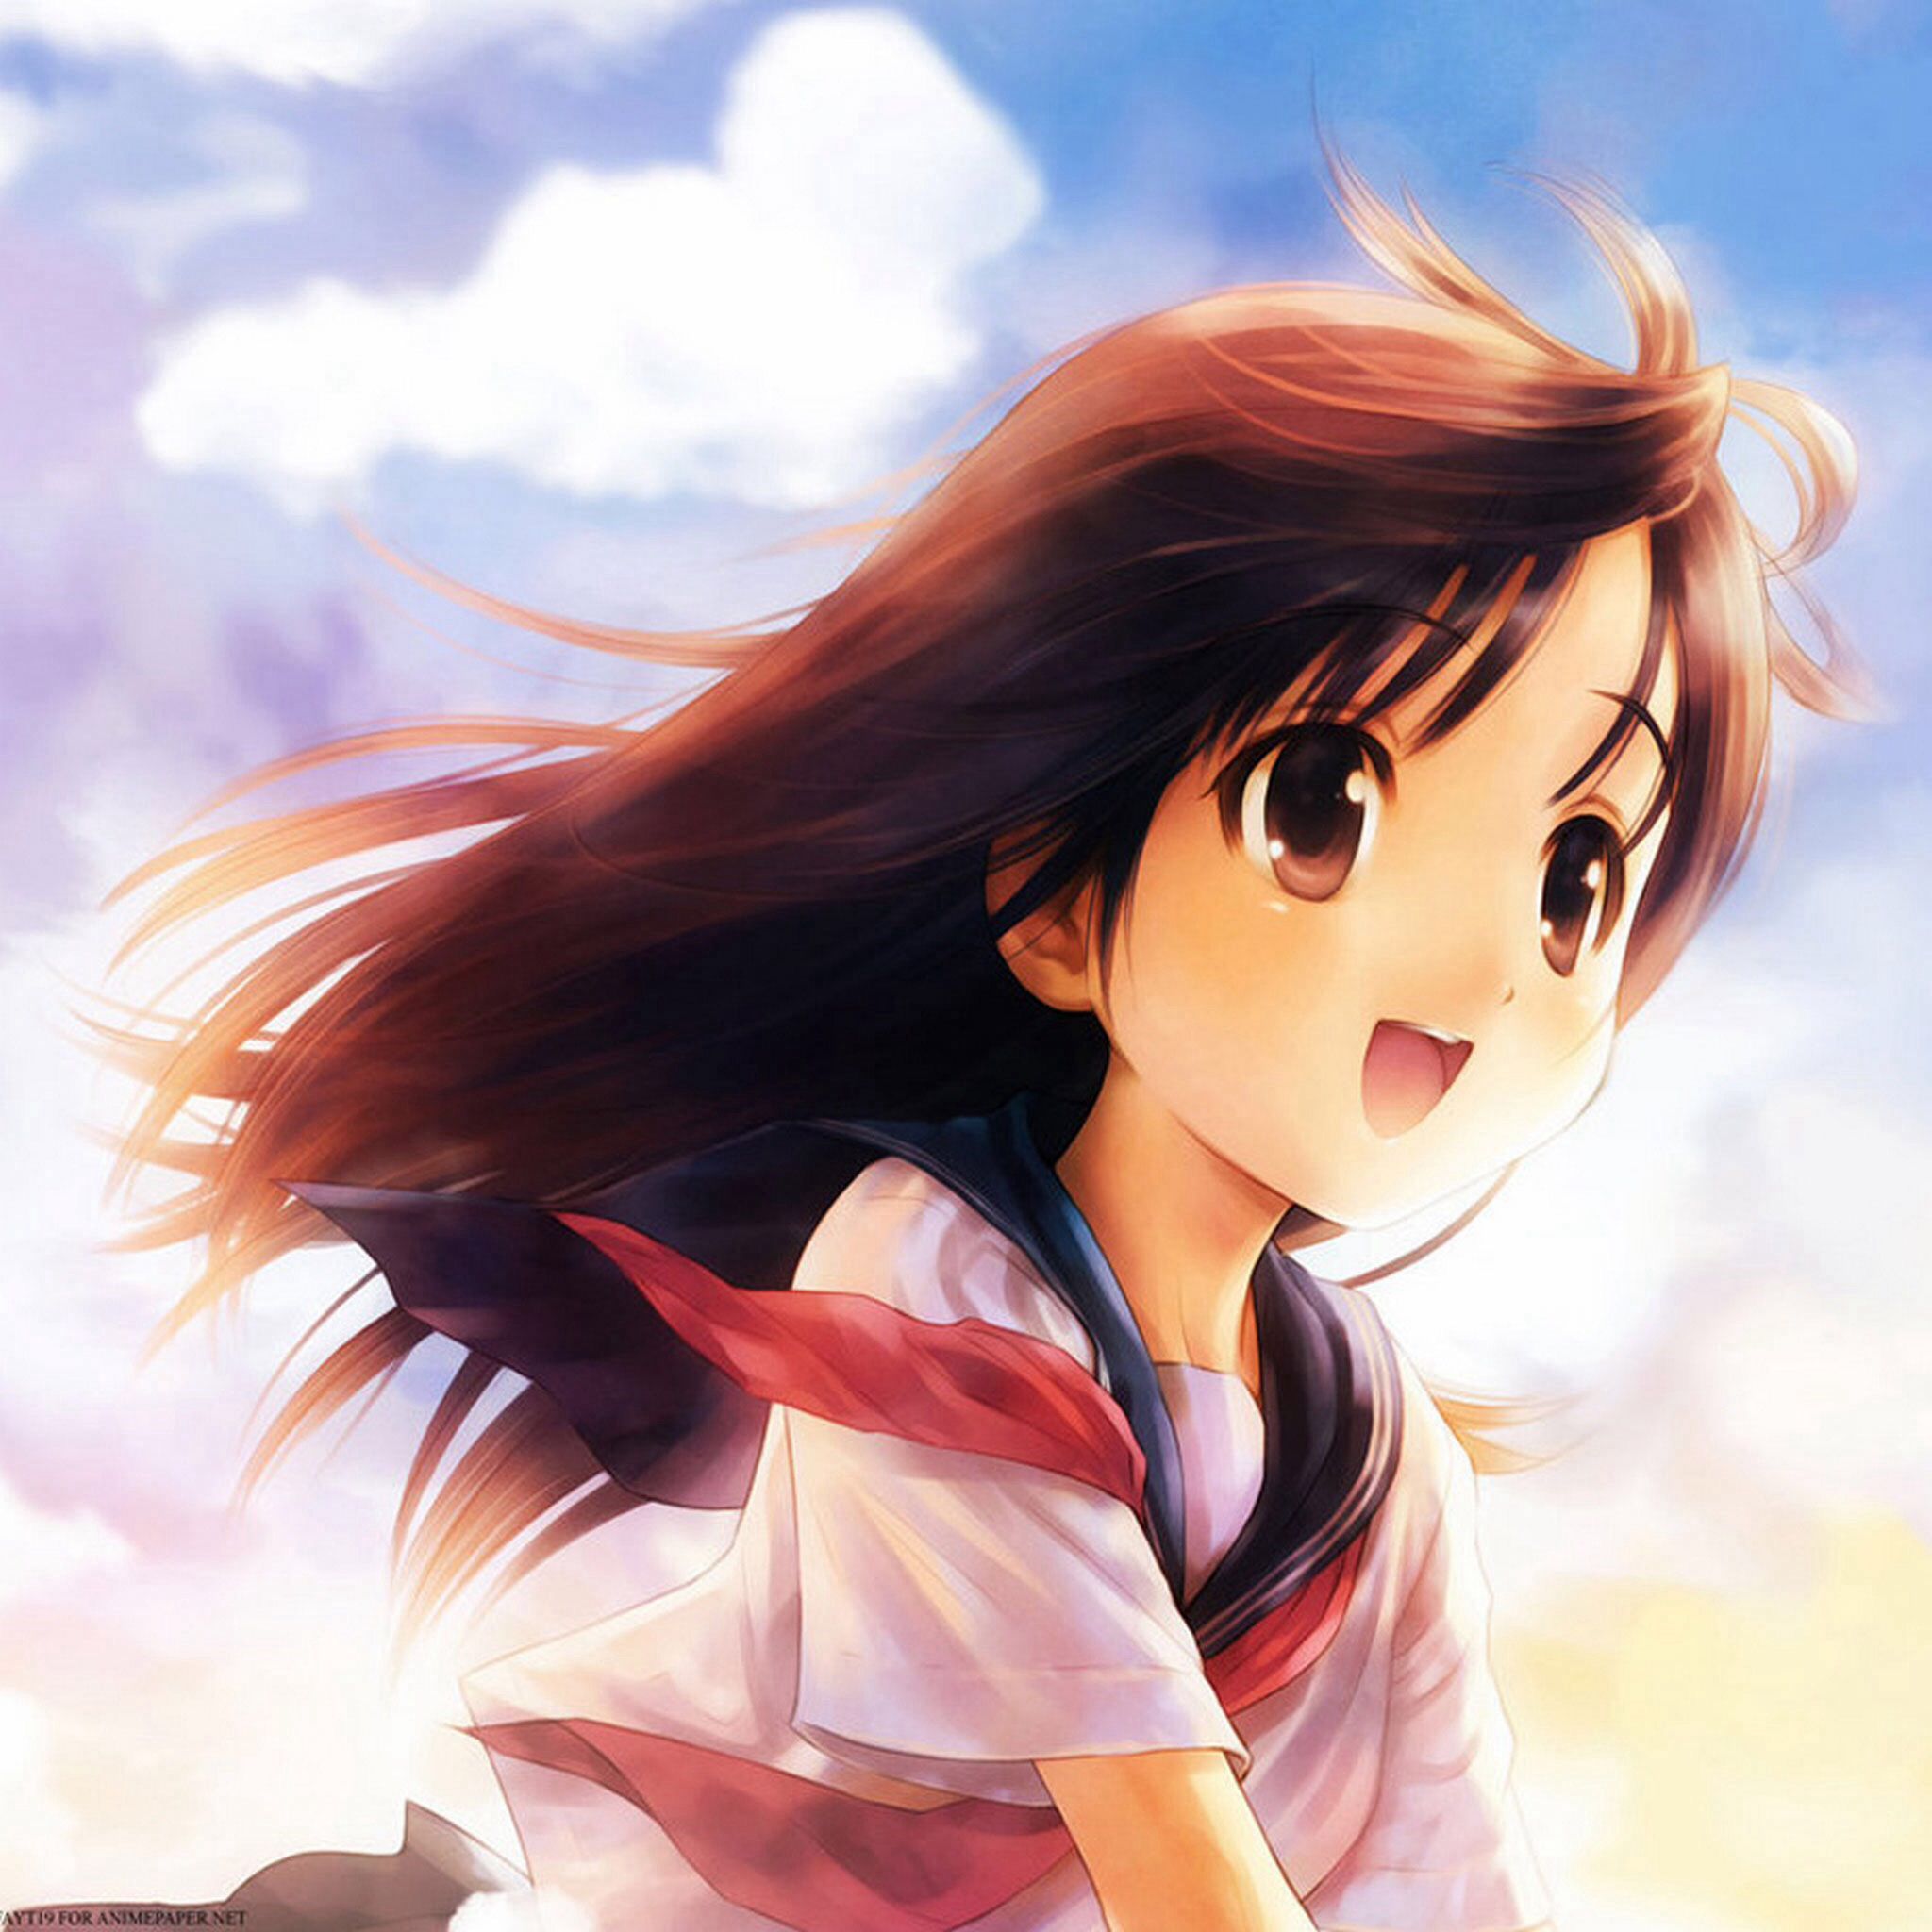 Brown Haired Anime Princess Wallpapers - Wallpaper Cave